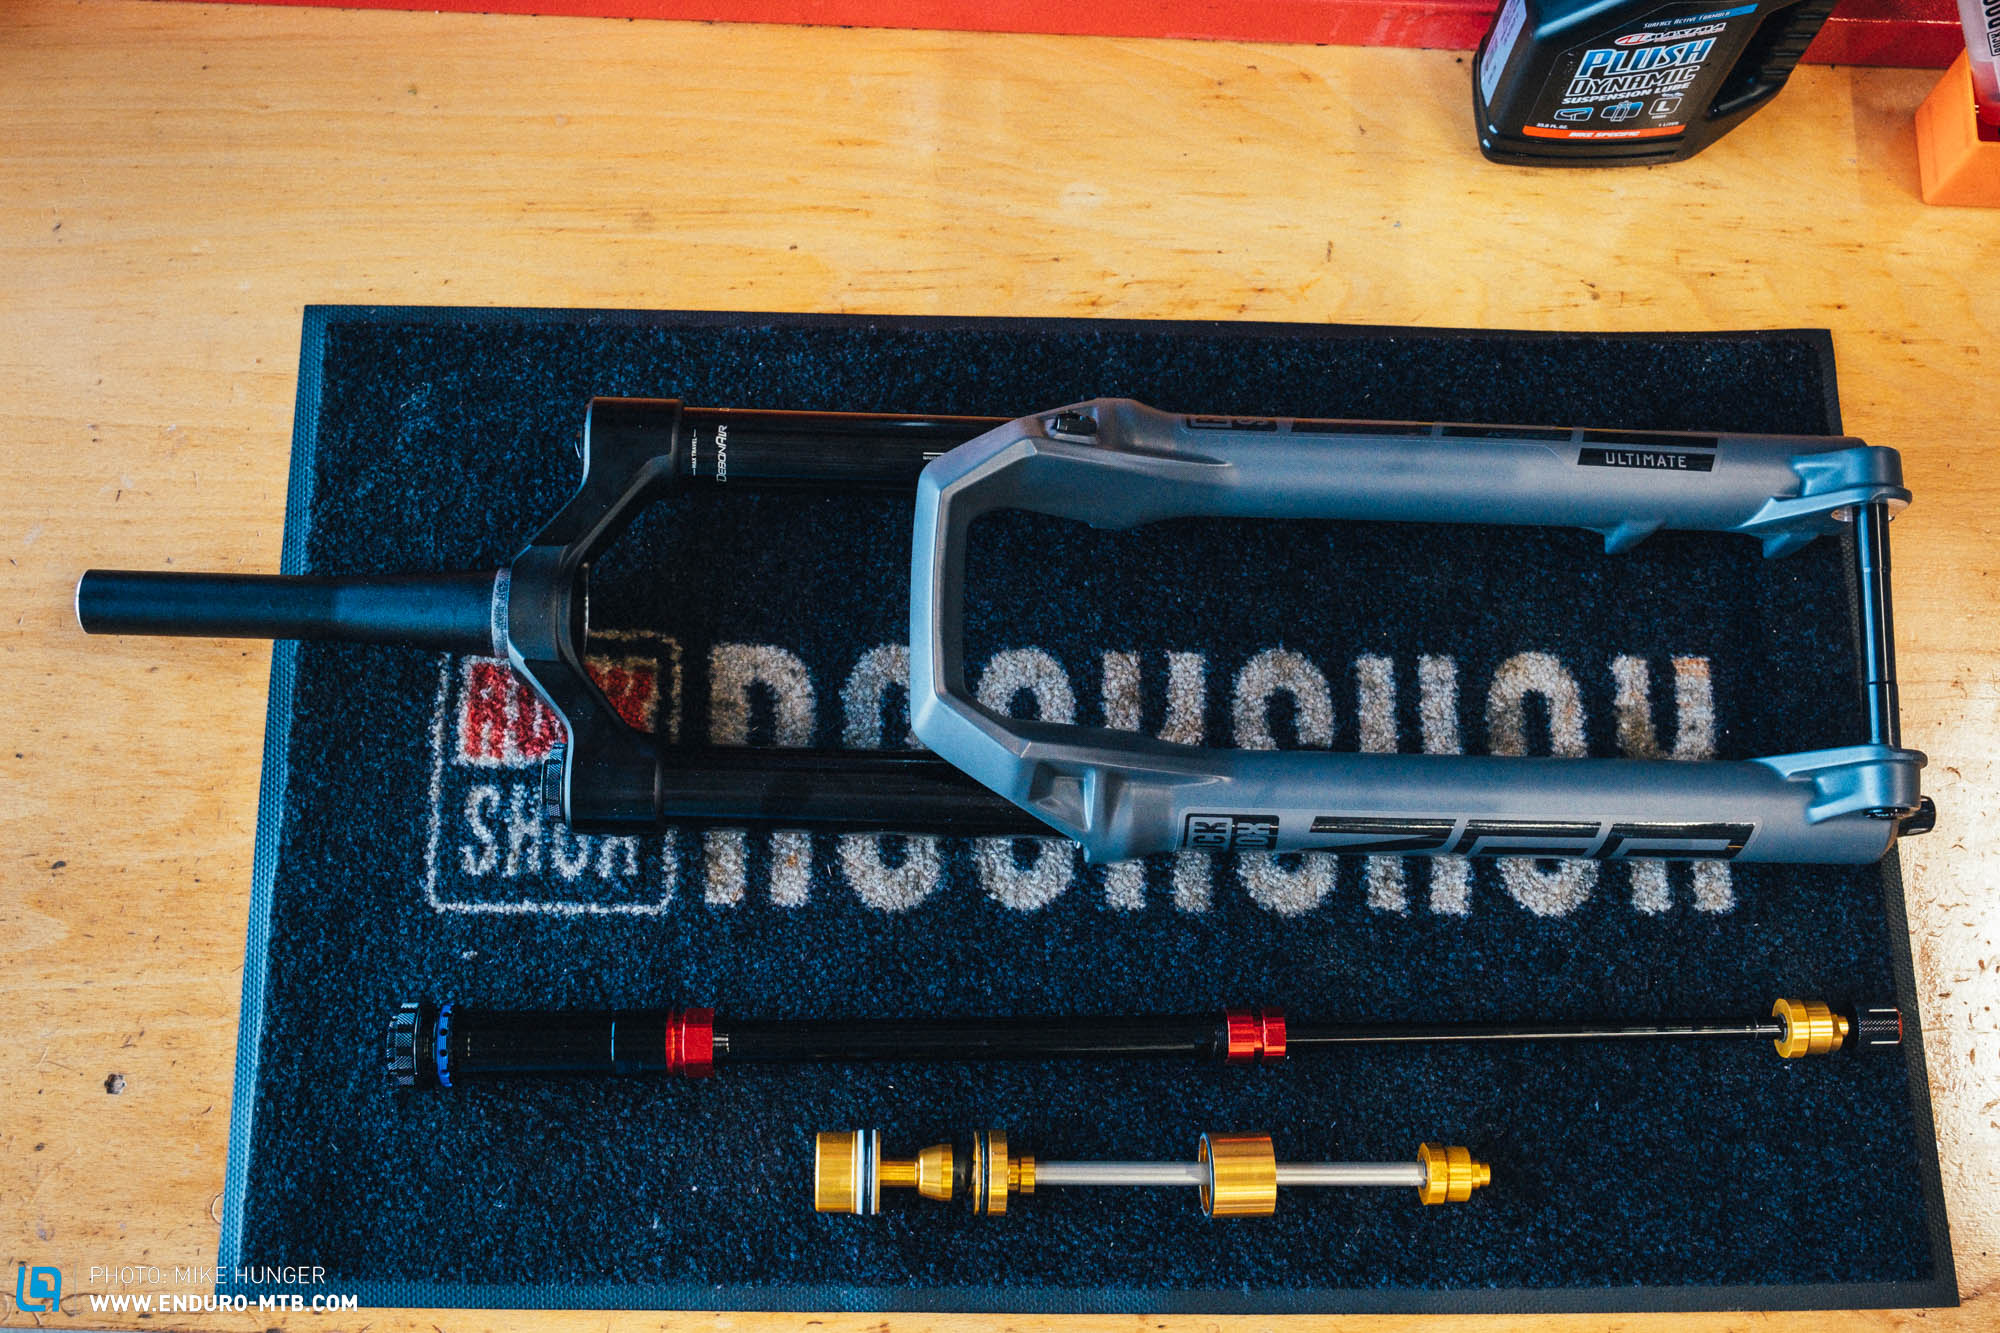 Upgrading your RockShox fork – How to adjust the travel or swap the damper cartridge